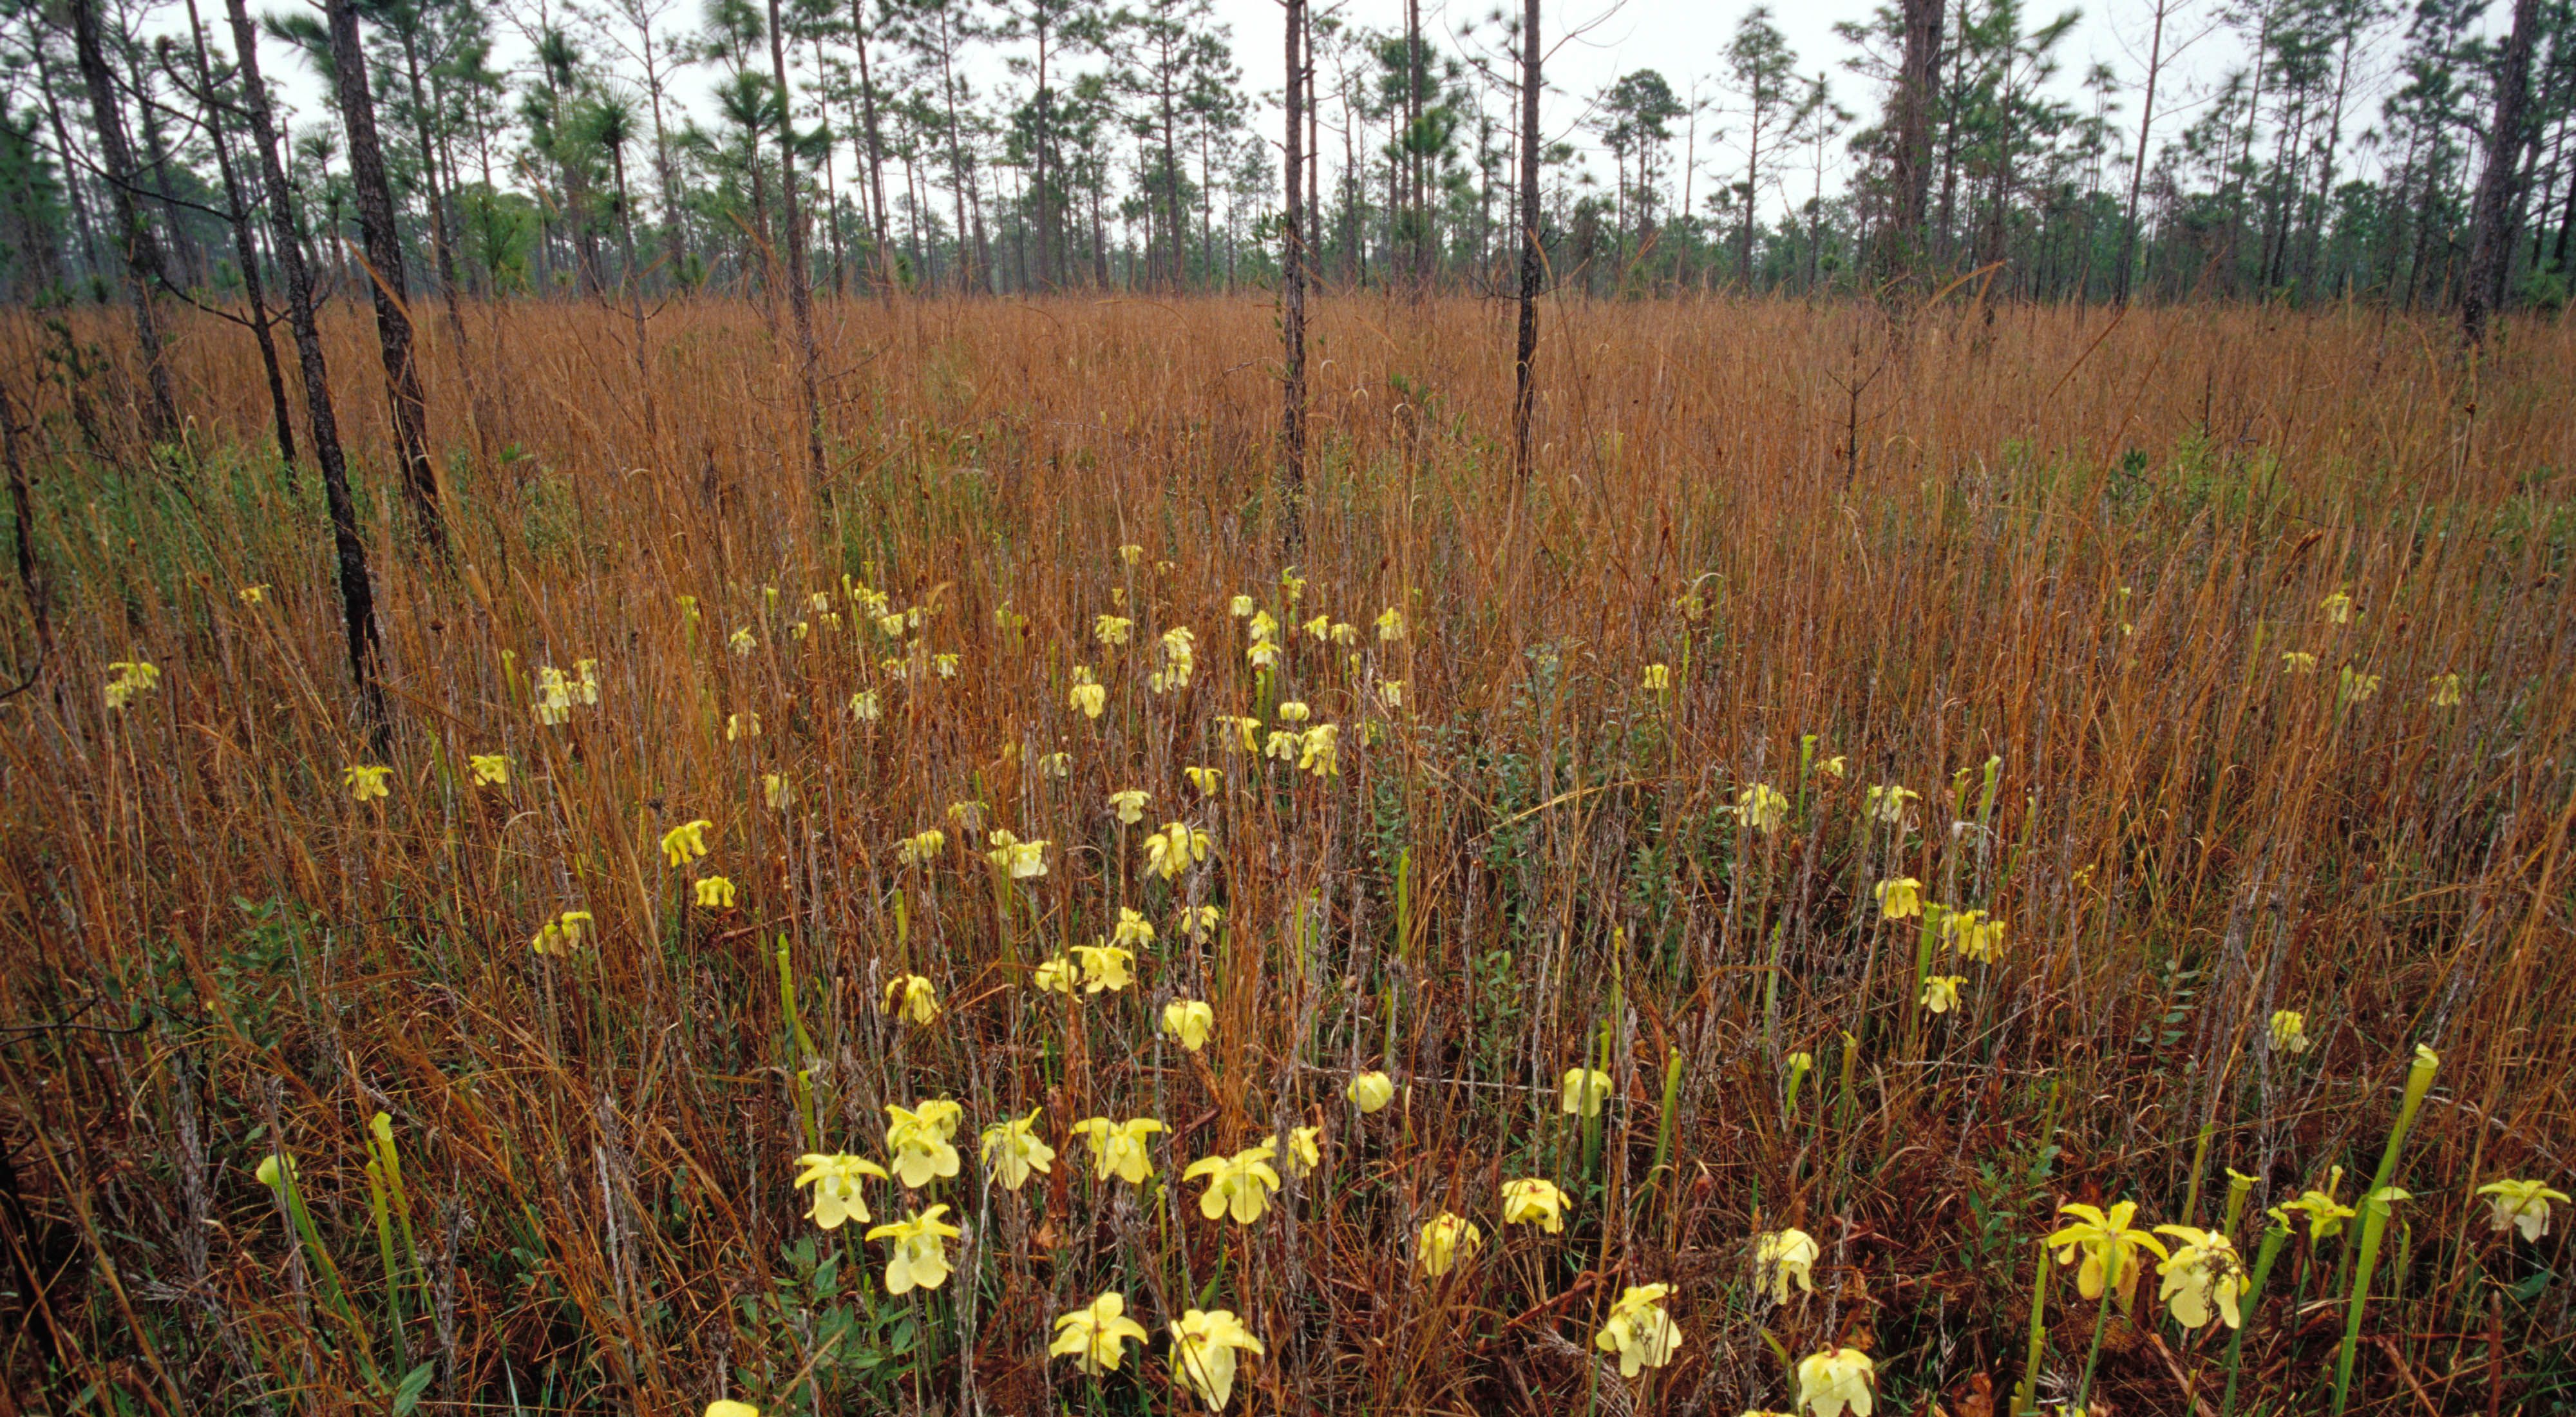 April 2002. Longleaf pine forest burned May 2001 with winged pitcher plant in foreground. Grand Bay Savanna in Mississippi/Alabama.